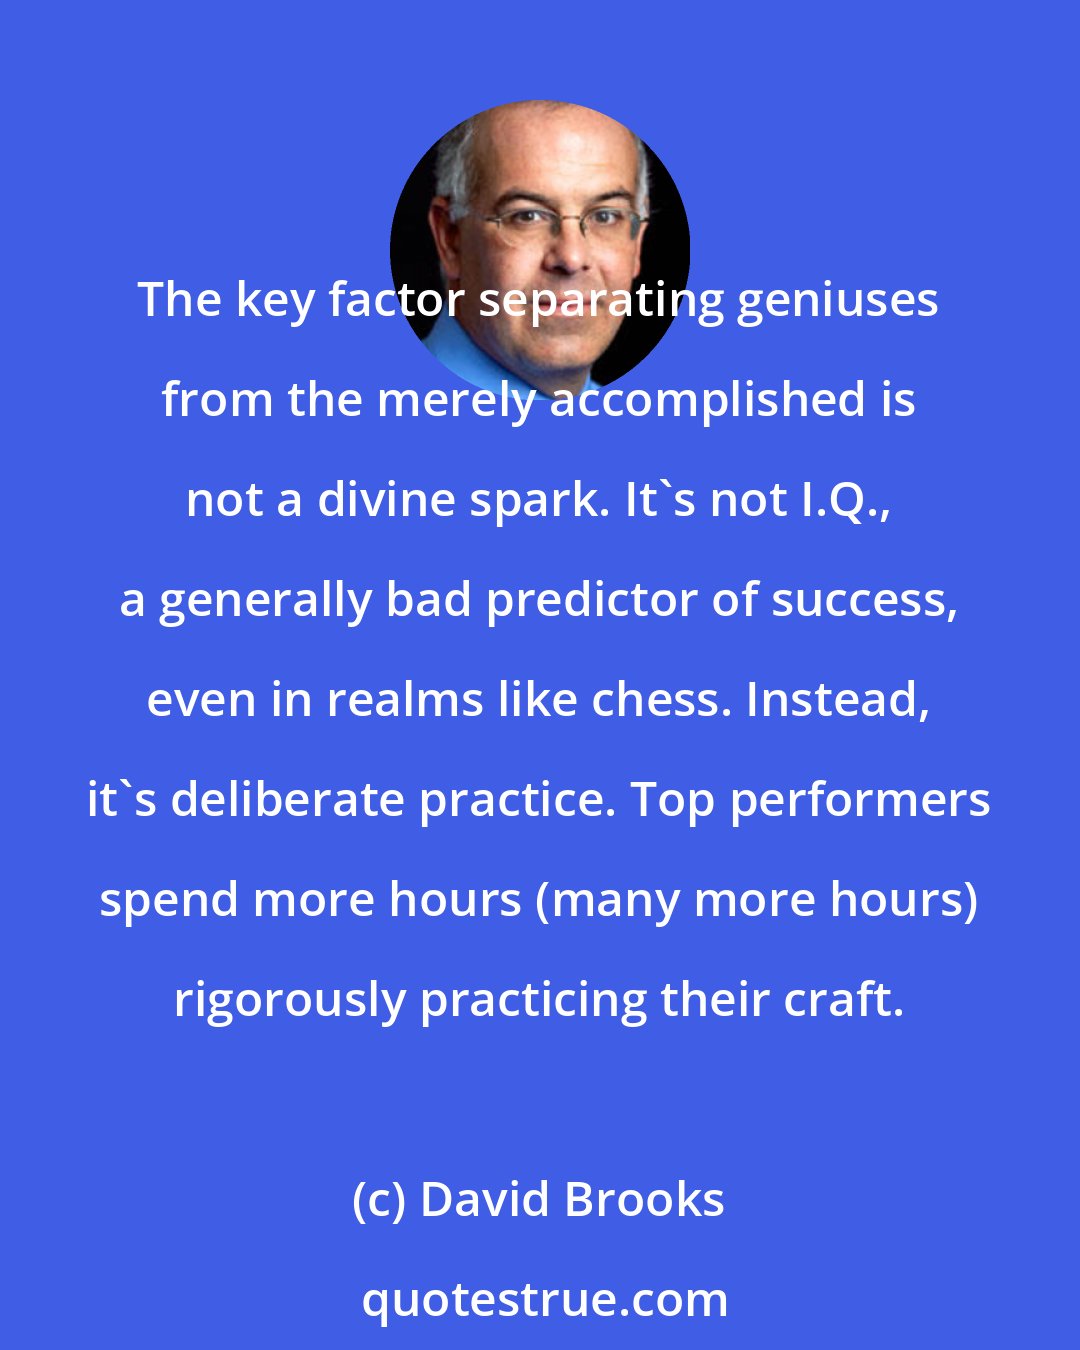 David Brooks: The key factor separating geniuses from the merely accomplished is not a divine spark. It's not I.Q., a generally bad predictor of success, even in realms like chess. Instead, it's deliberate practice. Top performers spend more hours (many more hours) rigorously practicing their craft.